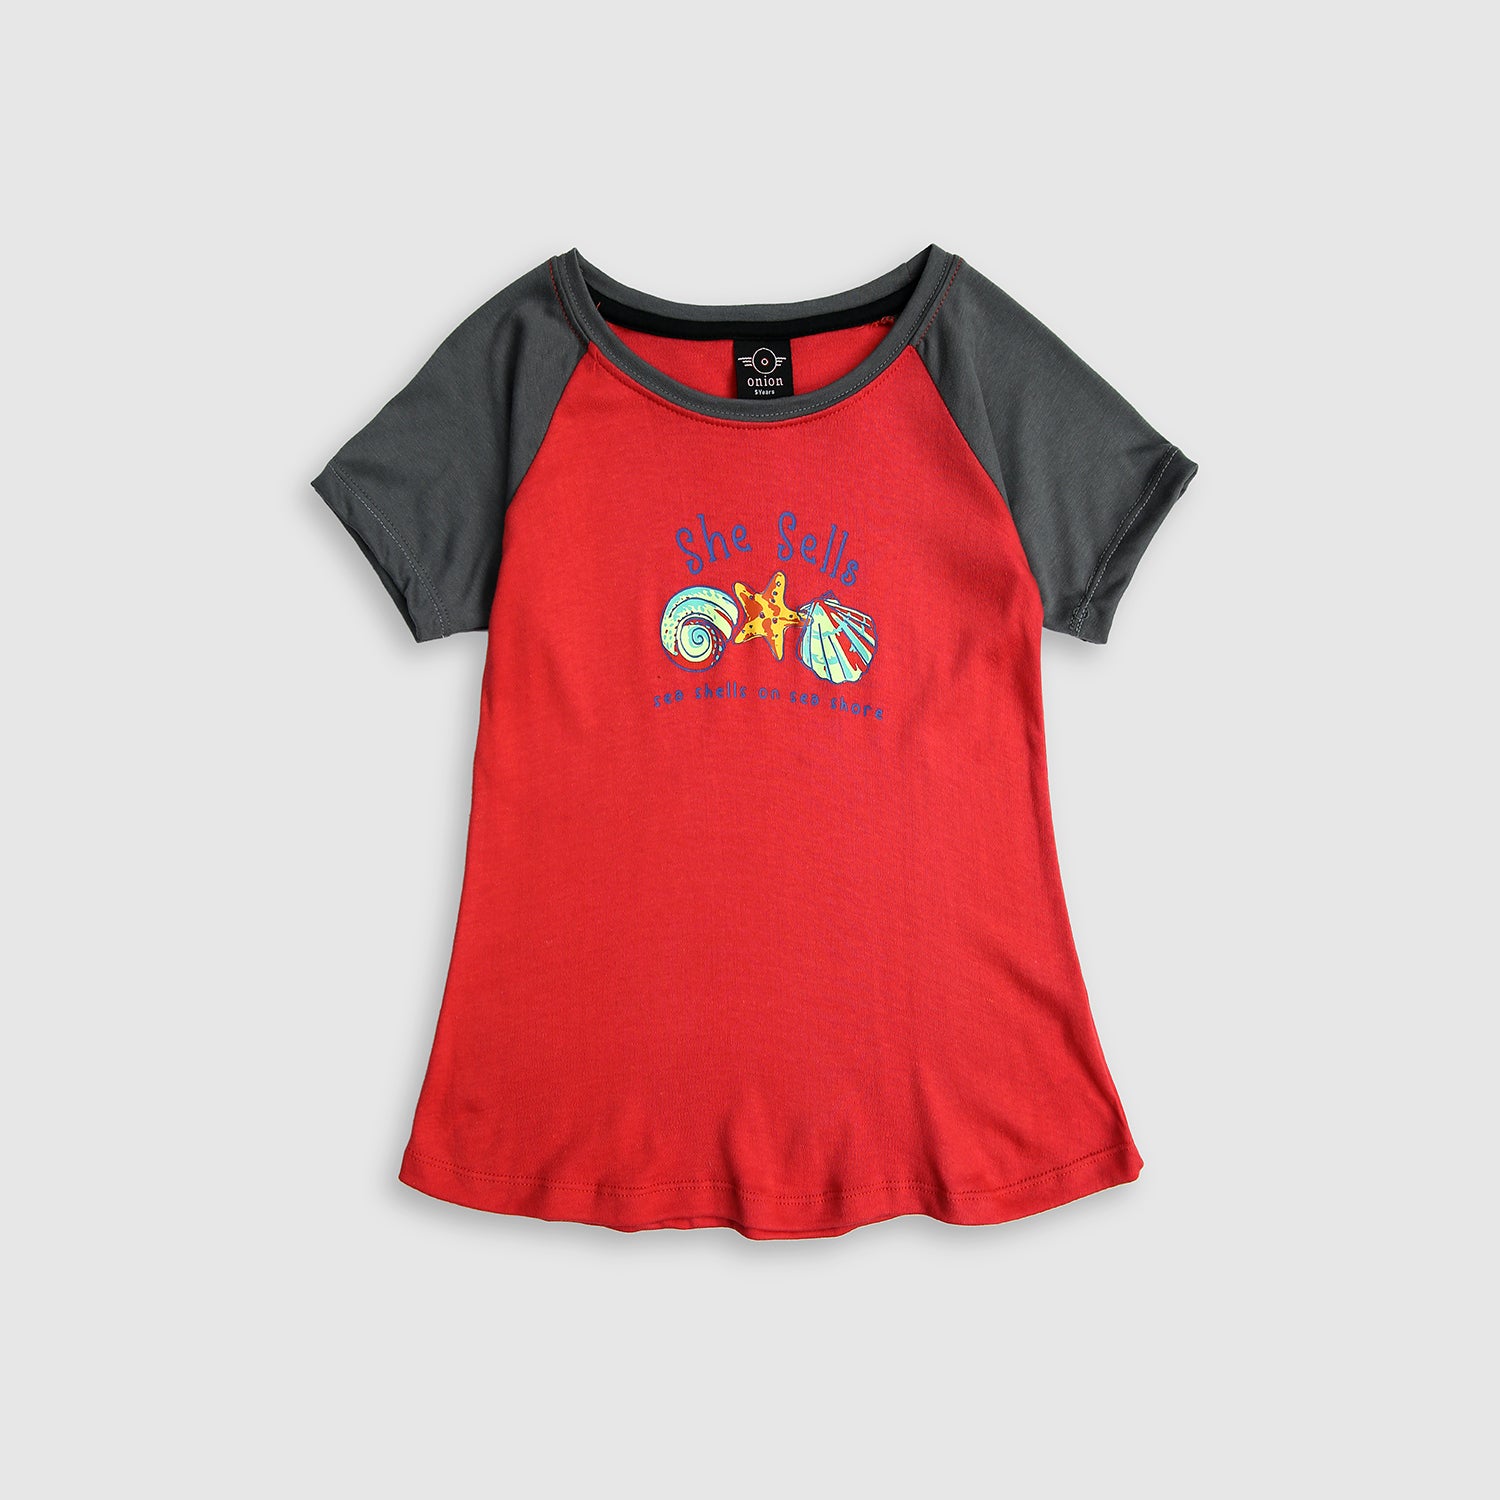 Girls Pure Cotton "She Sells" Graphic T-shirt Frock